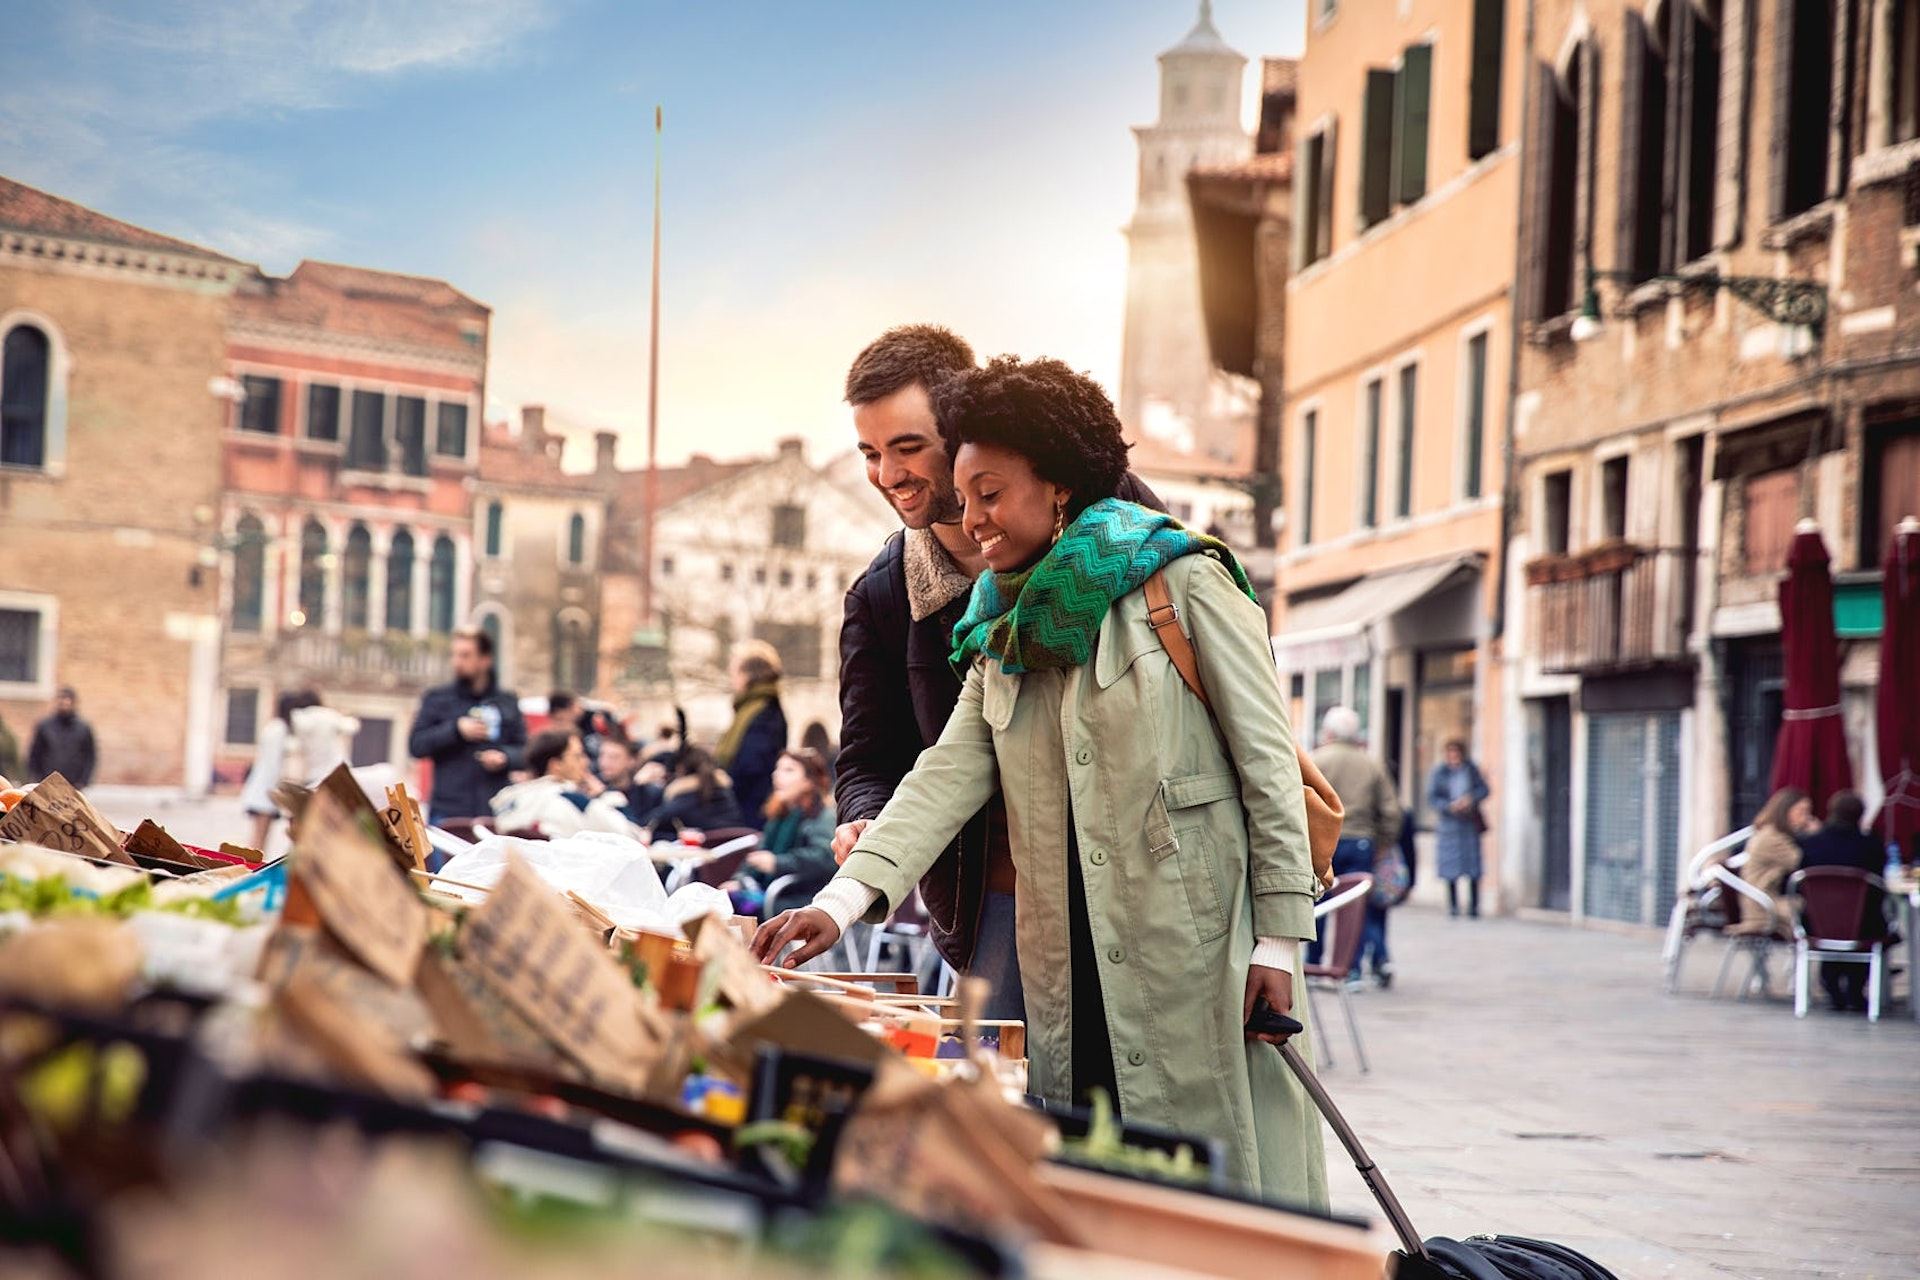 A couple shopping together at an outdoor fruit market in Venice